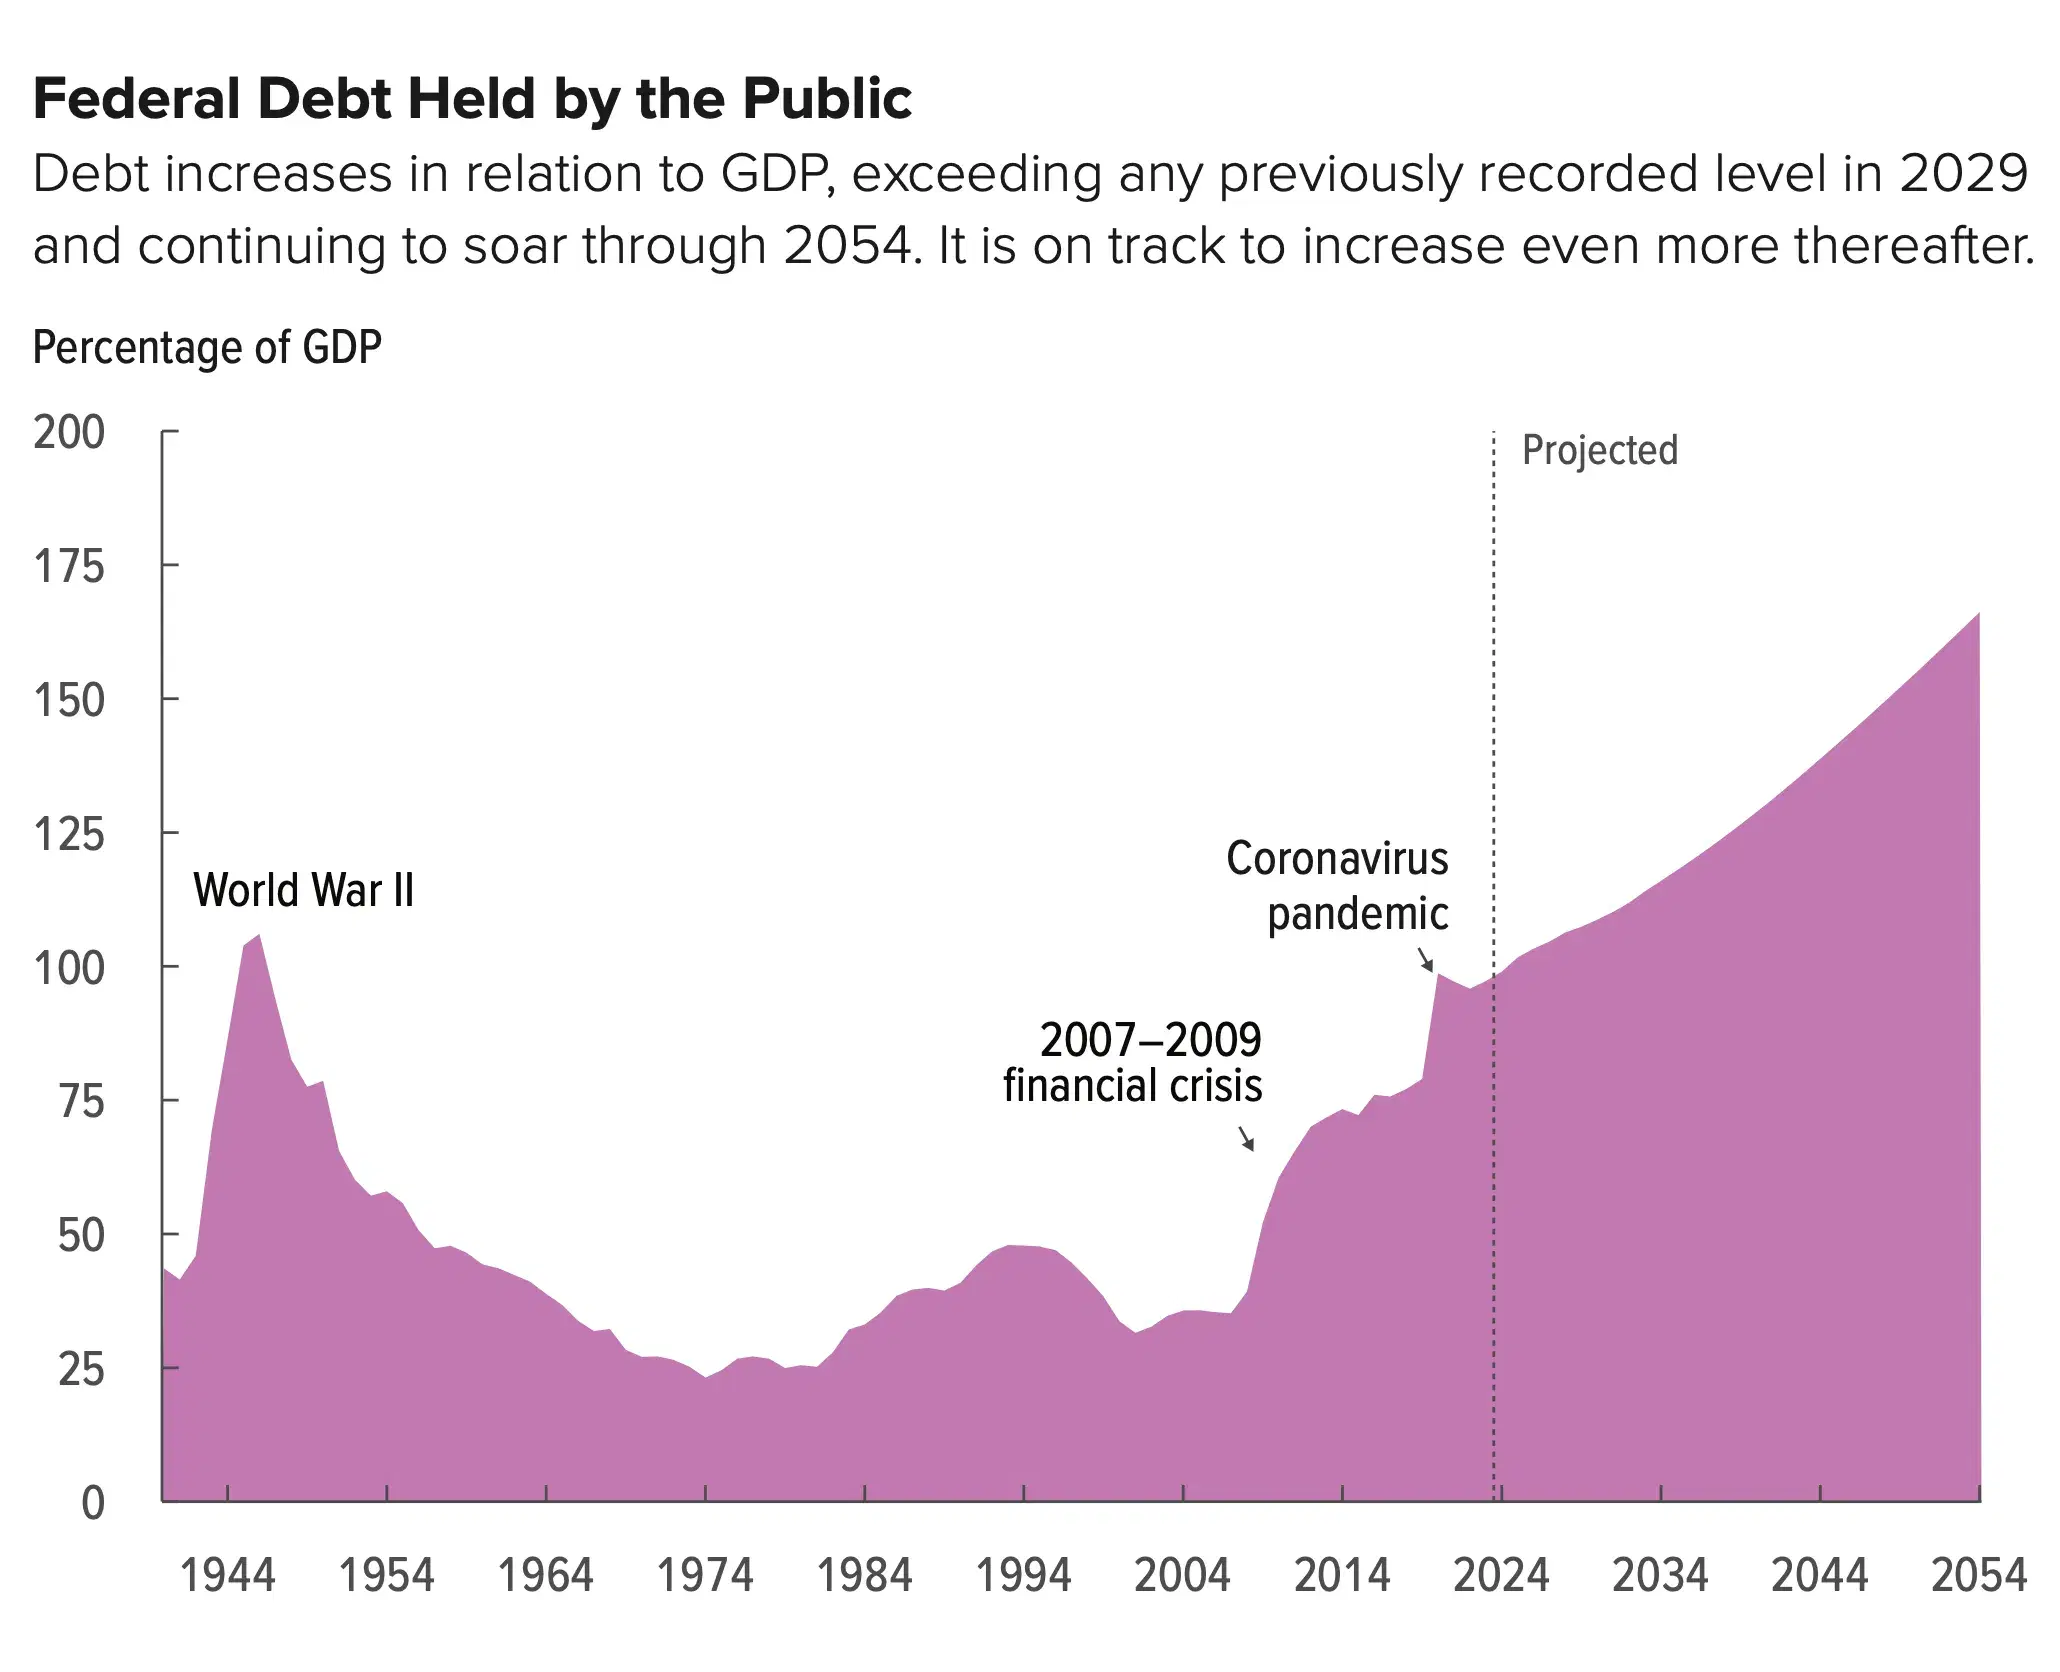 Federal Debt Held by the Public Expected to Rise